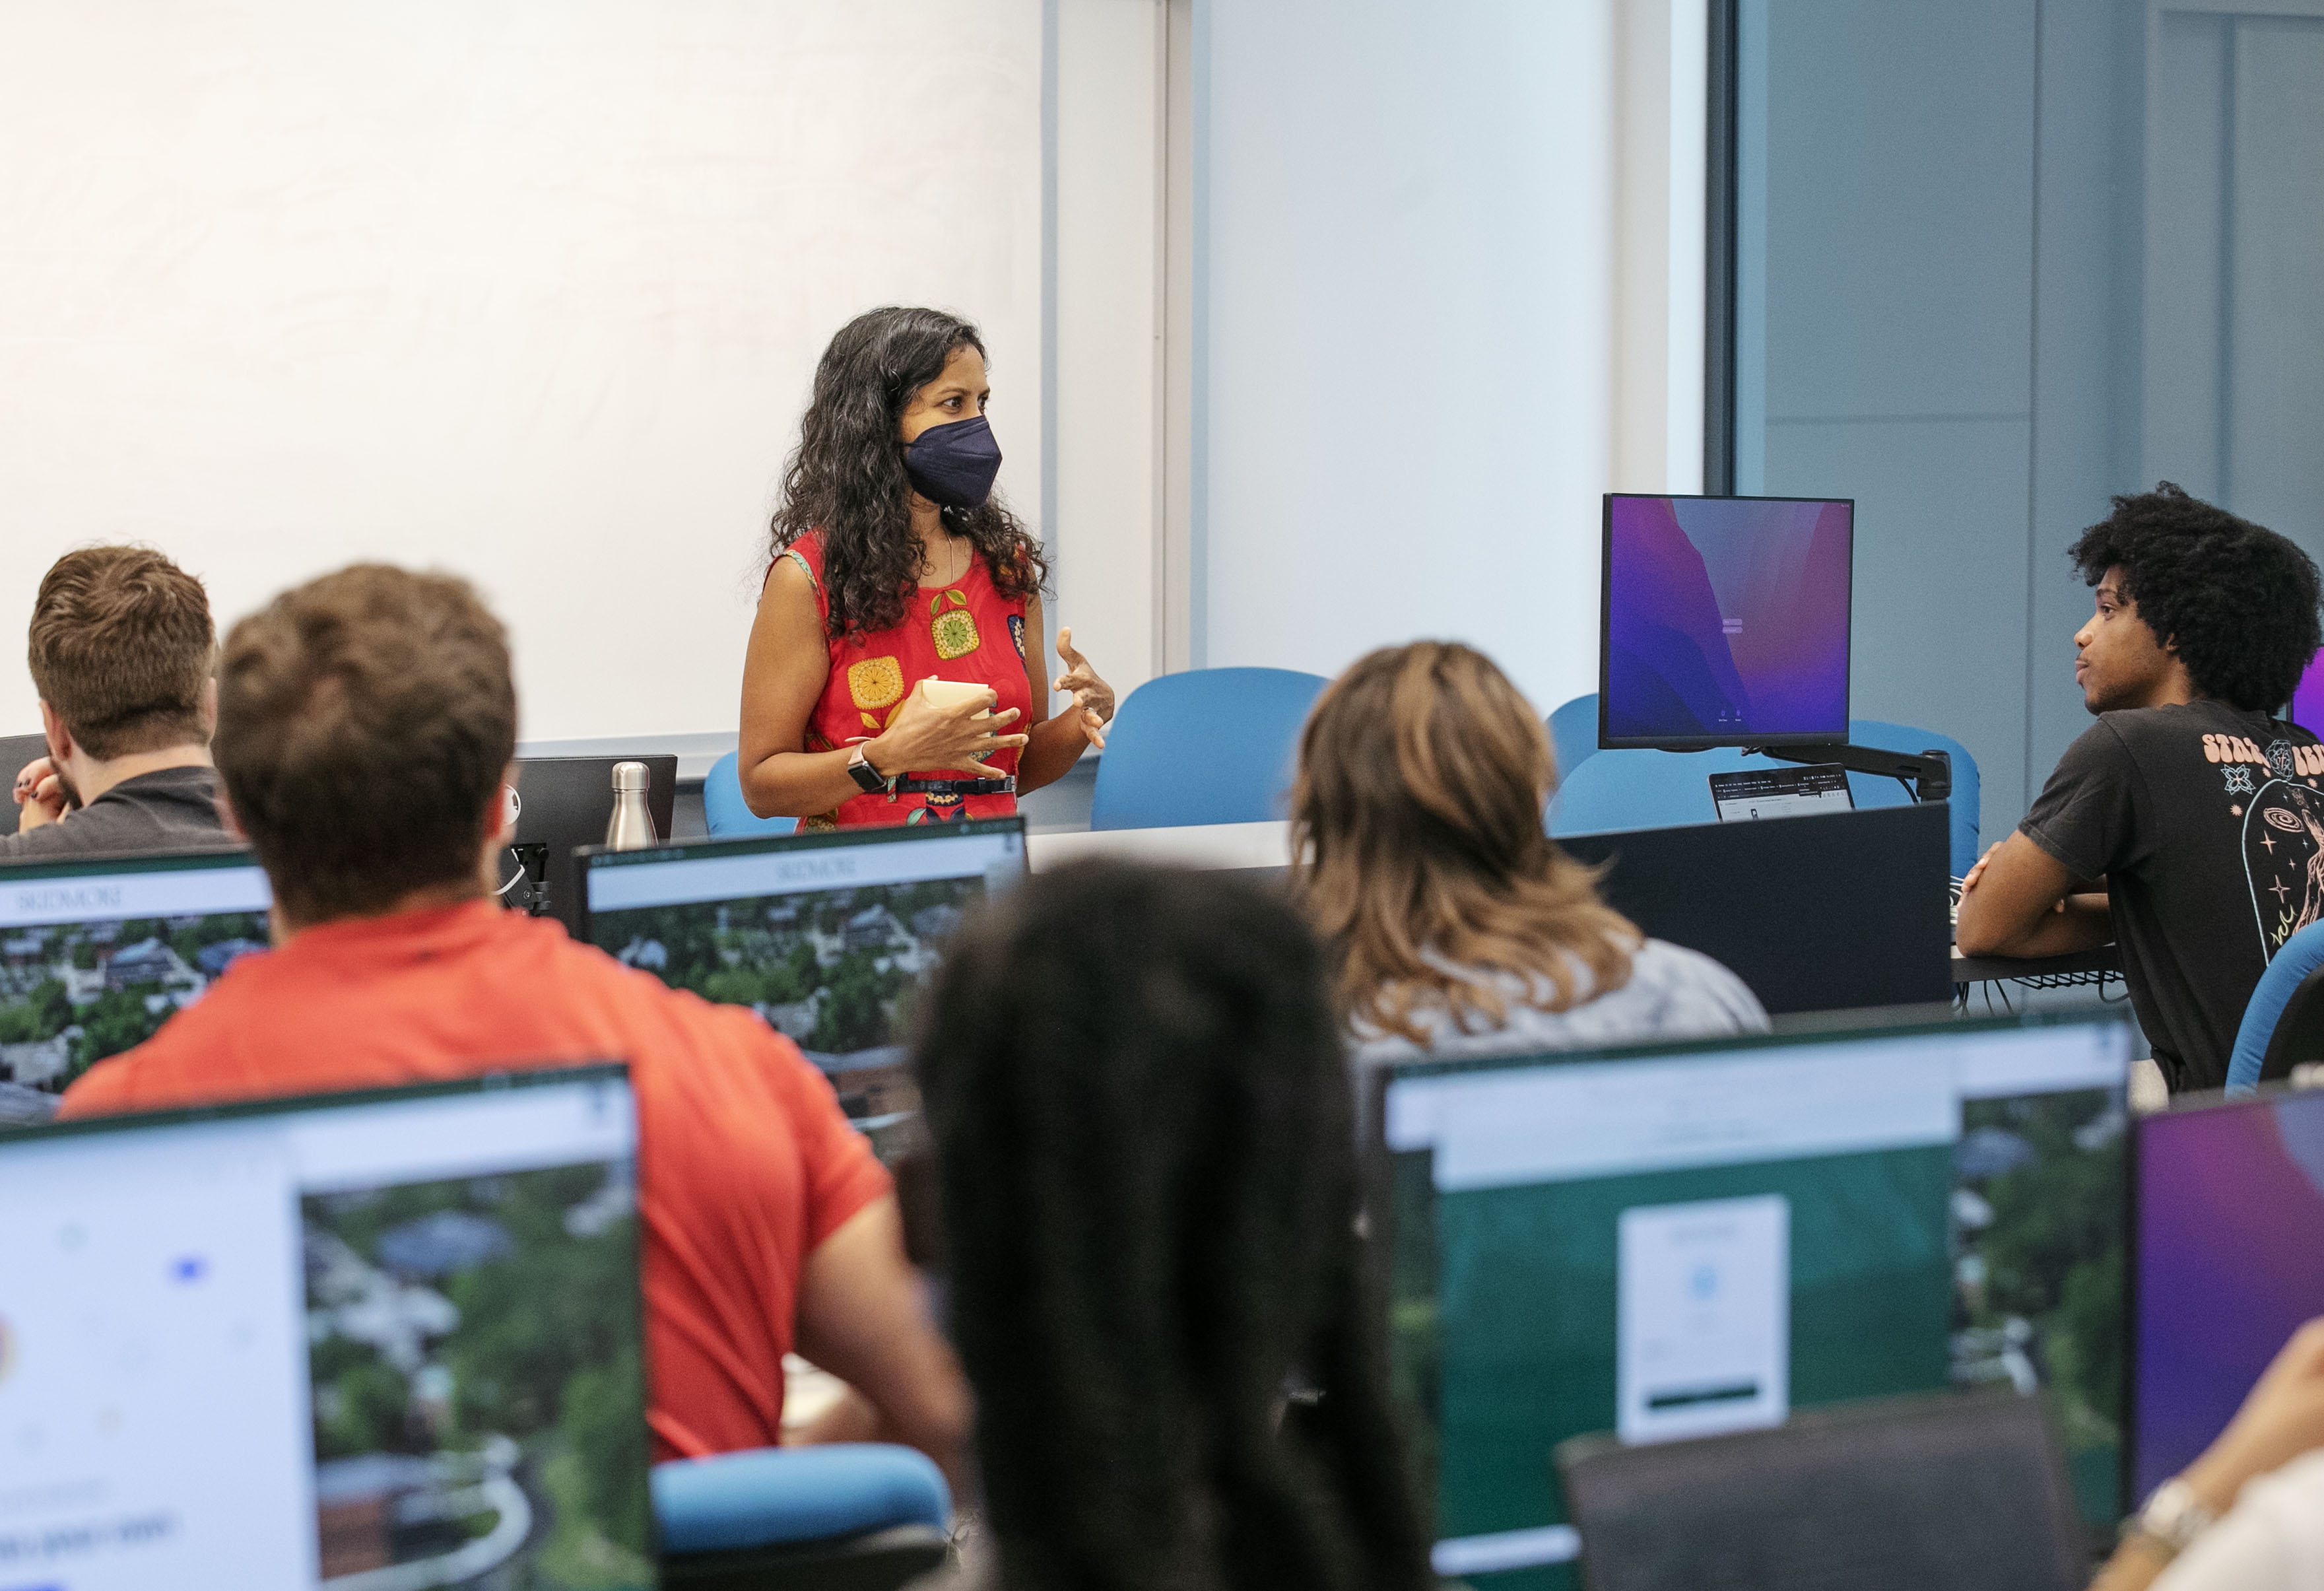 Students watch attentively from behind a row of computers as Aarathi Prasad leads a Mobile Computing course.